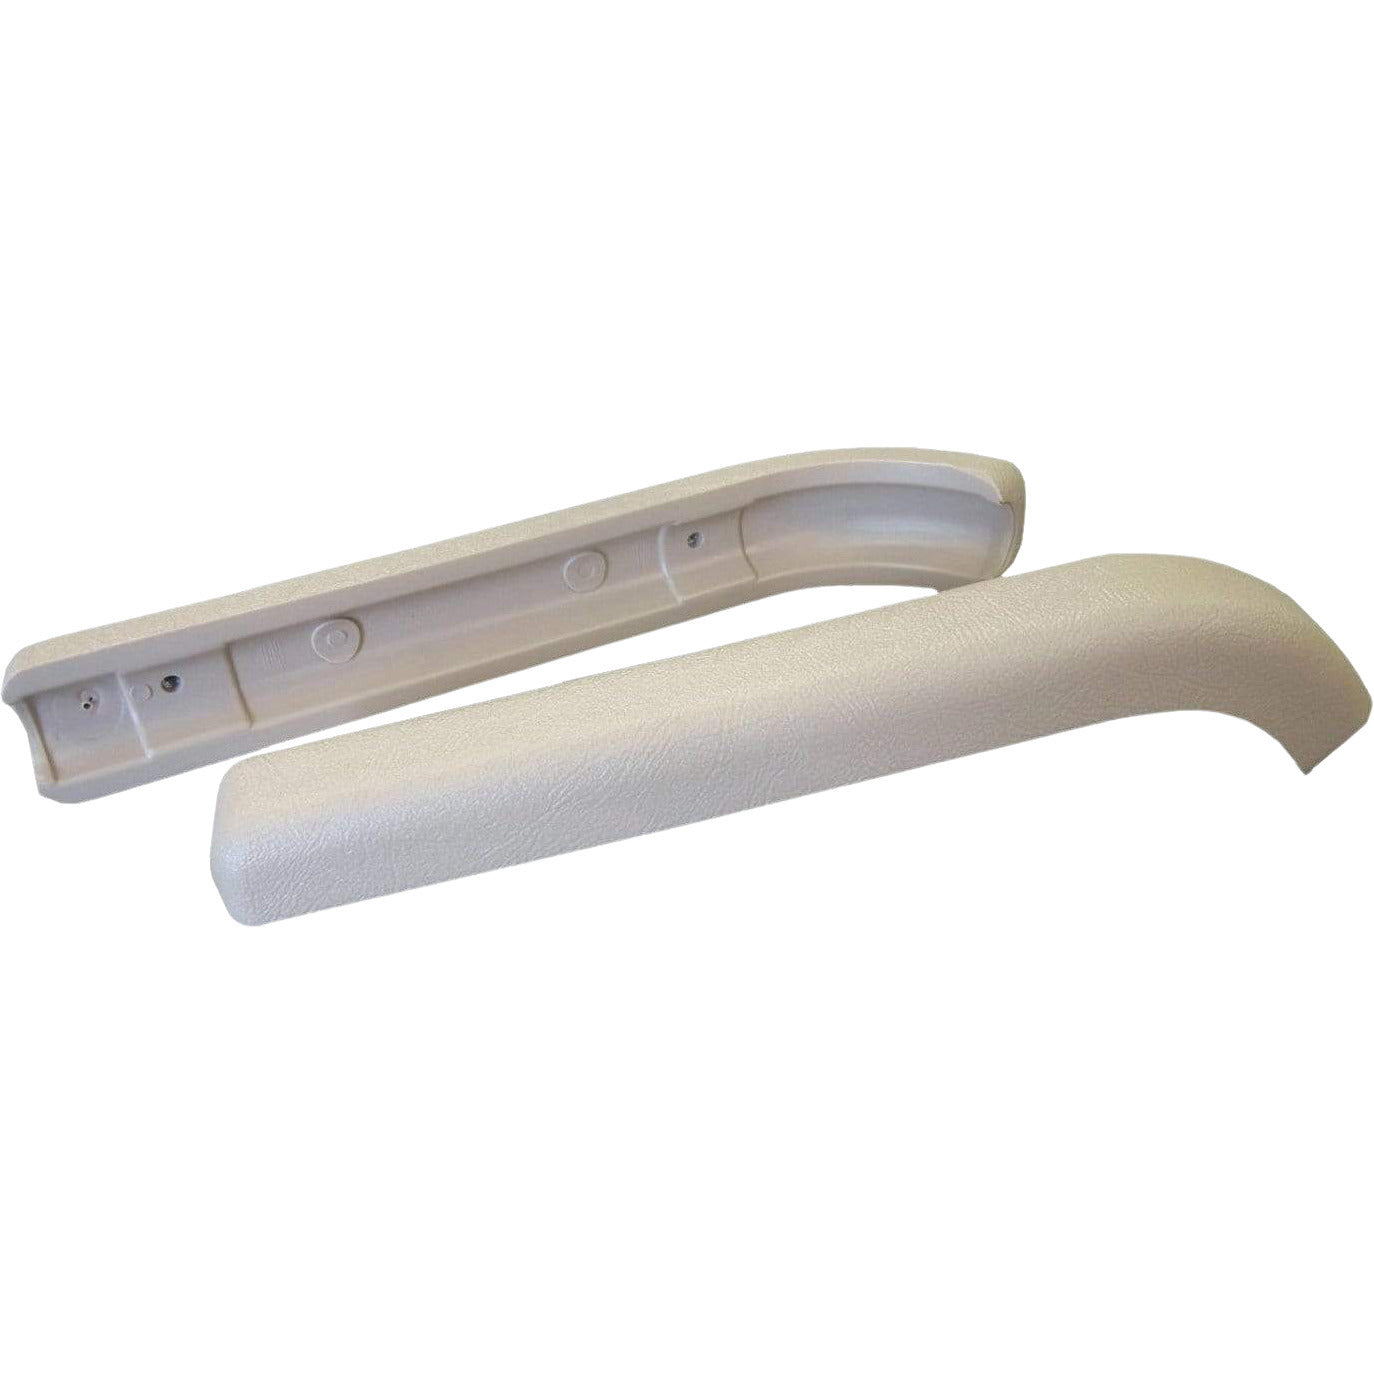 ConvaQuip Arm Rests Model 775-White Curved Armrests for Commodes and Shower Chairs by ConvaQuip